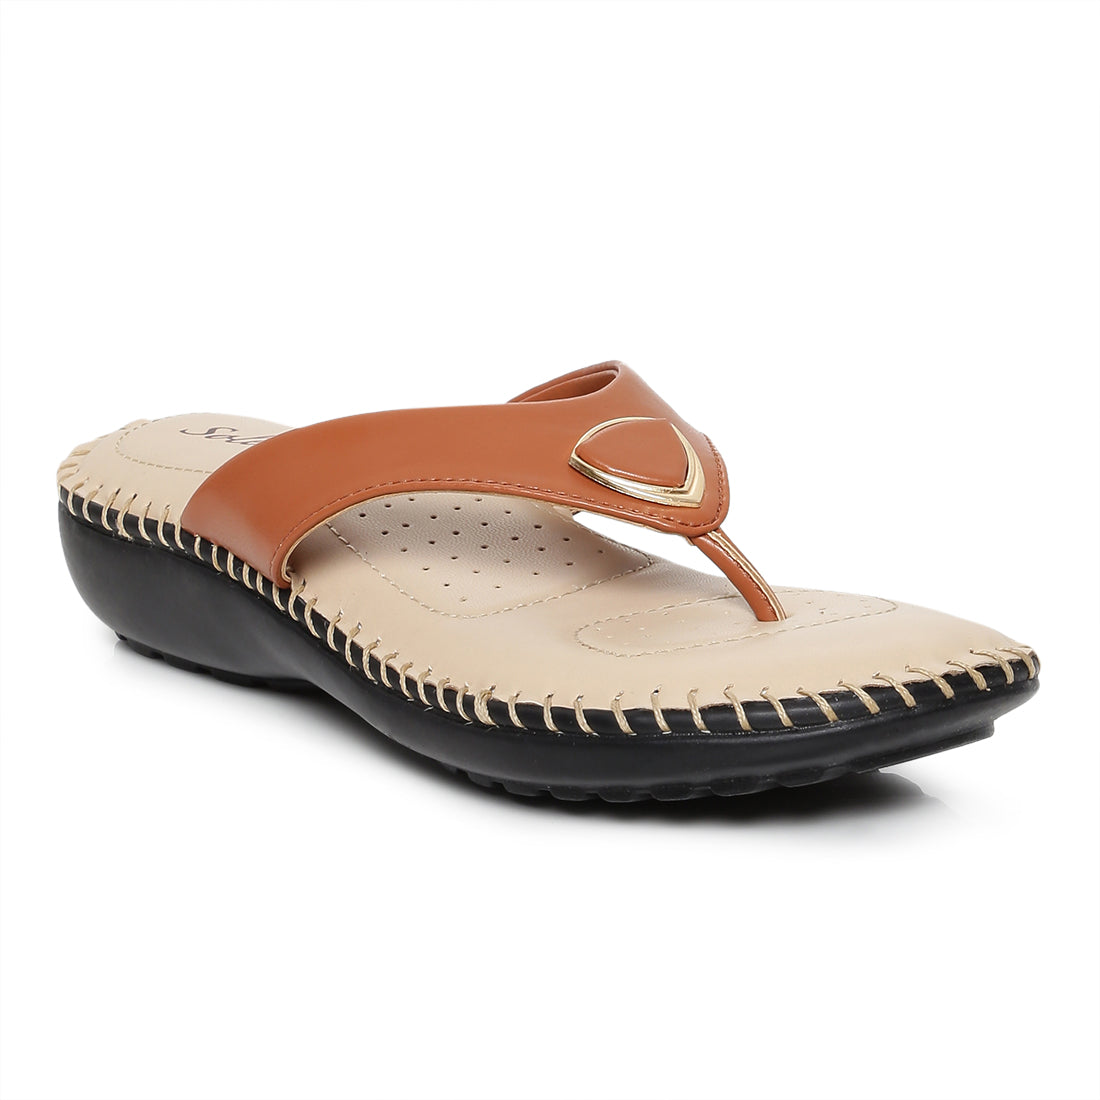 Paragon  K6014L Women Sandals | Casual &amp; Formal Sandals | Stylish, Comfortable &amp; Durable | For Daily &amp; Occasion Wear